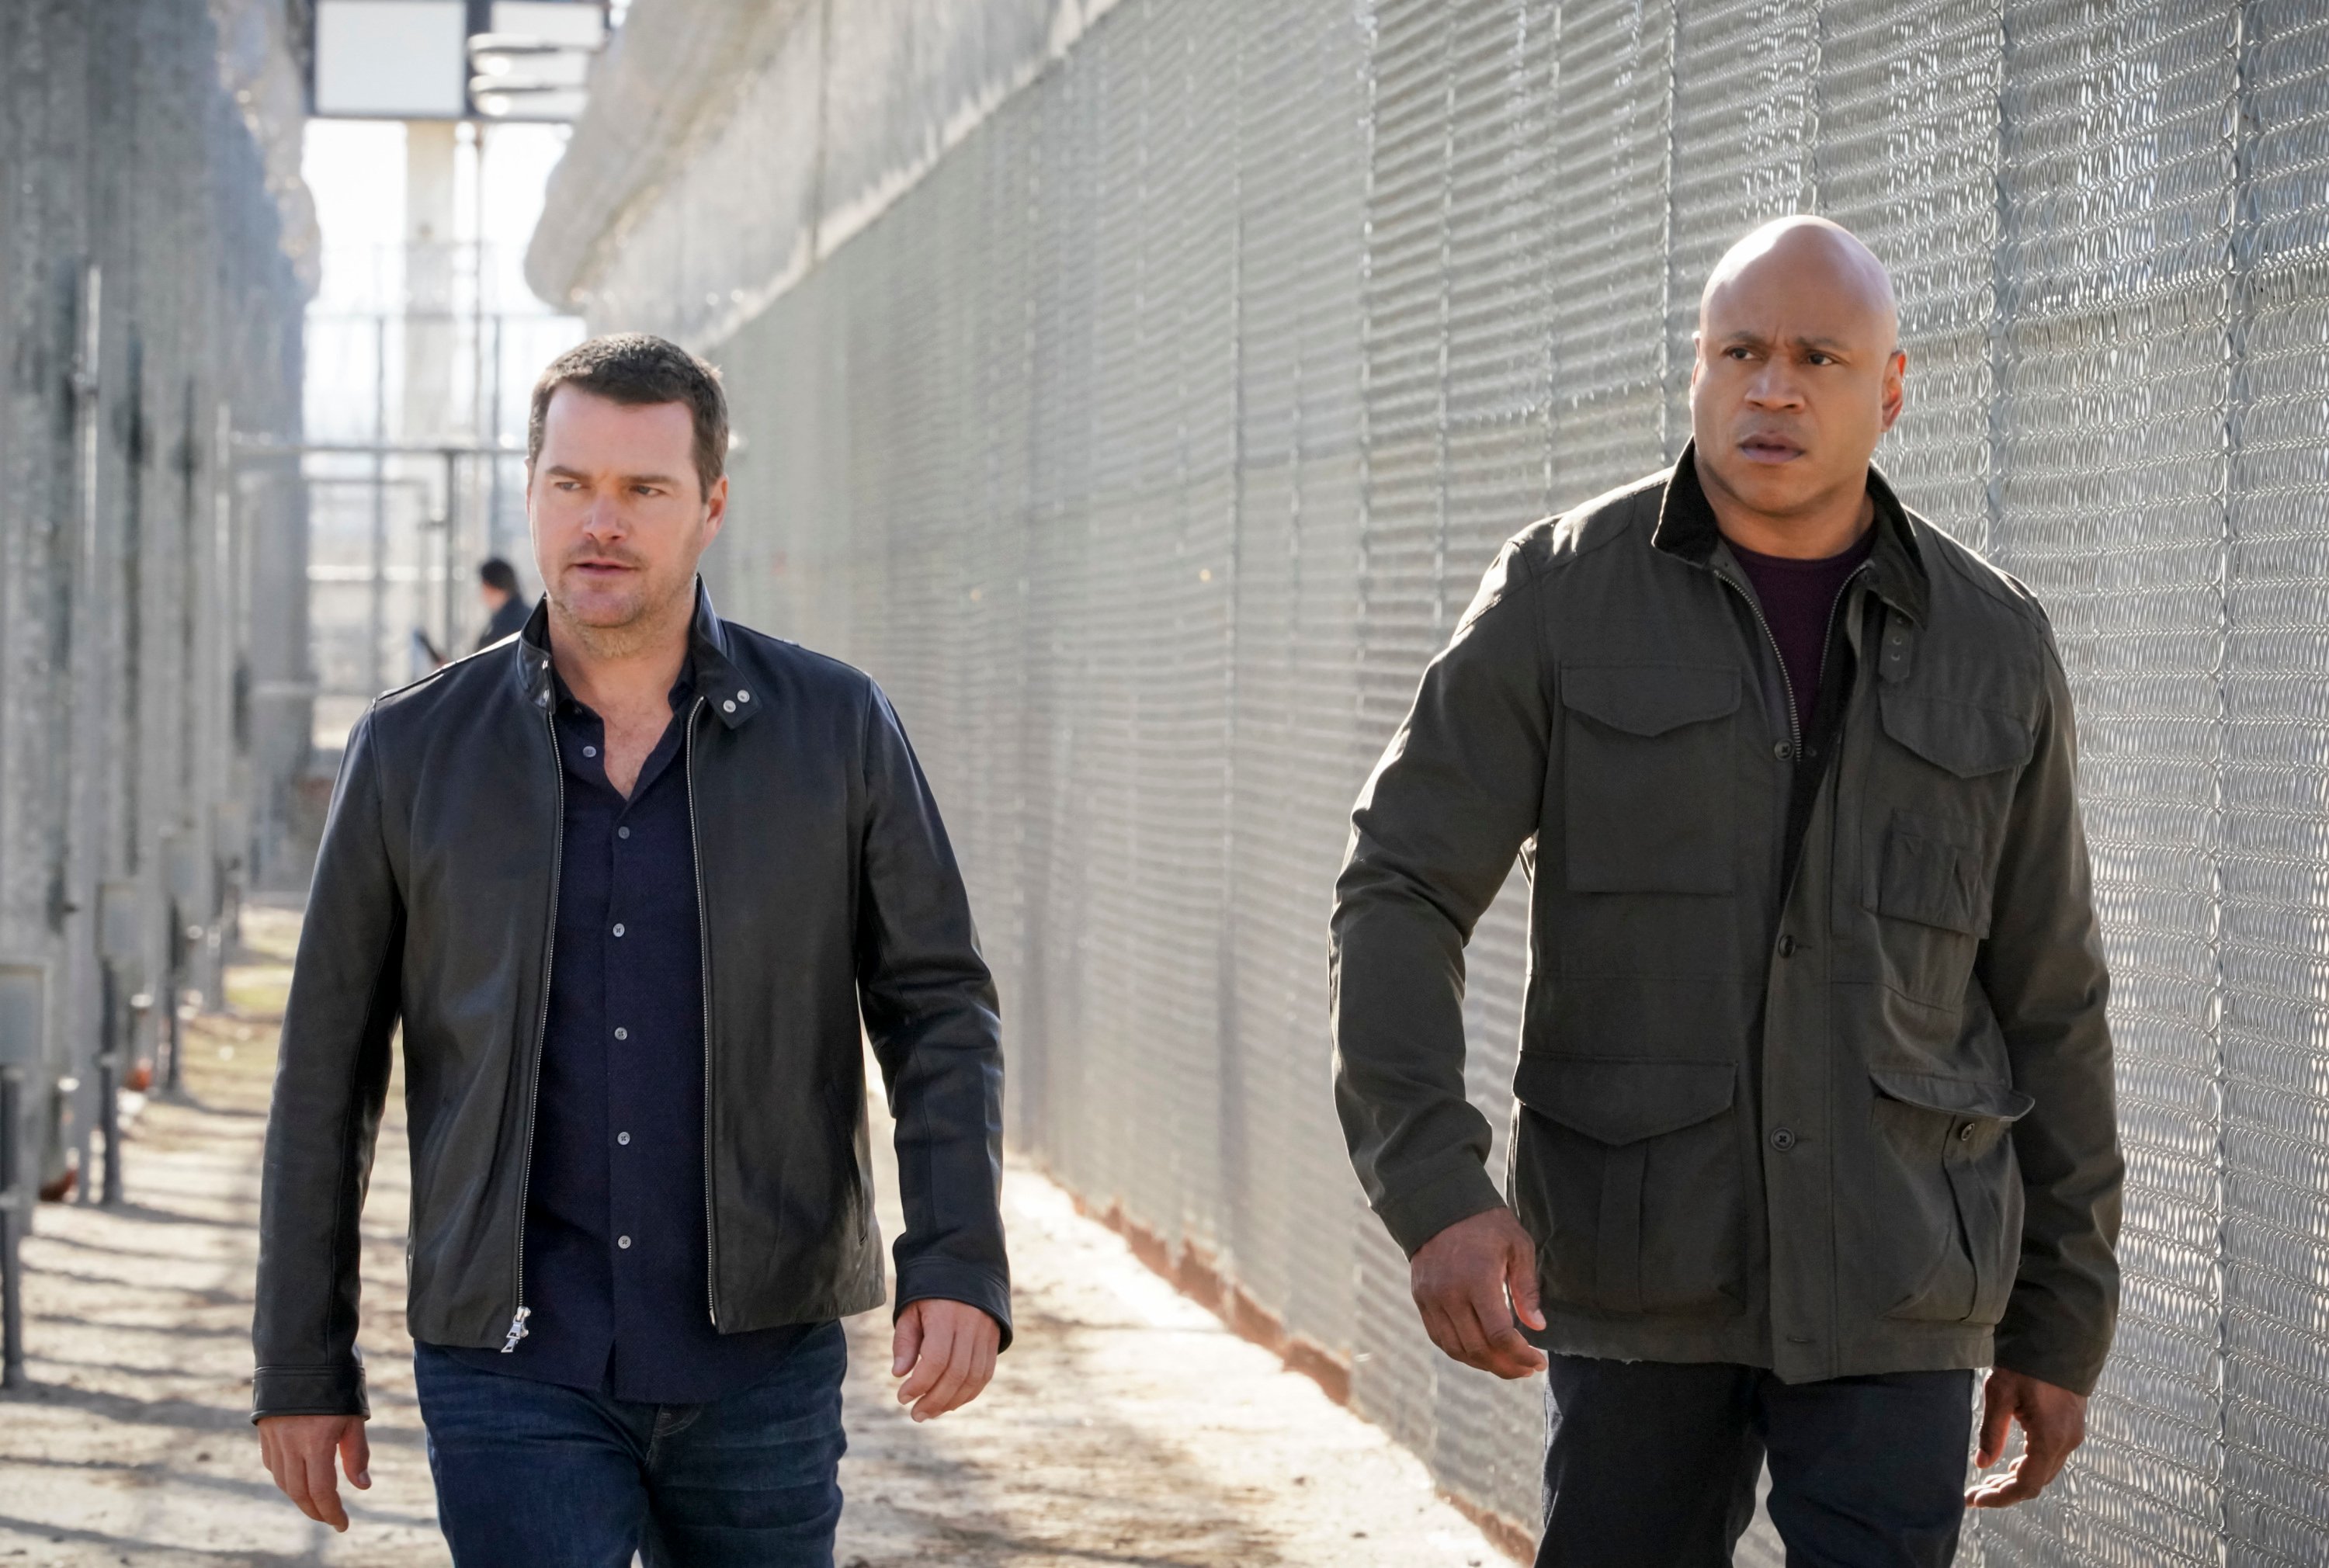 Actors Chris O'Donnell and LL Cool J walk side-by-side along a fence in a scene from 'NCIS: Los Angeles.'  